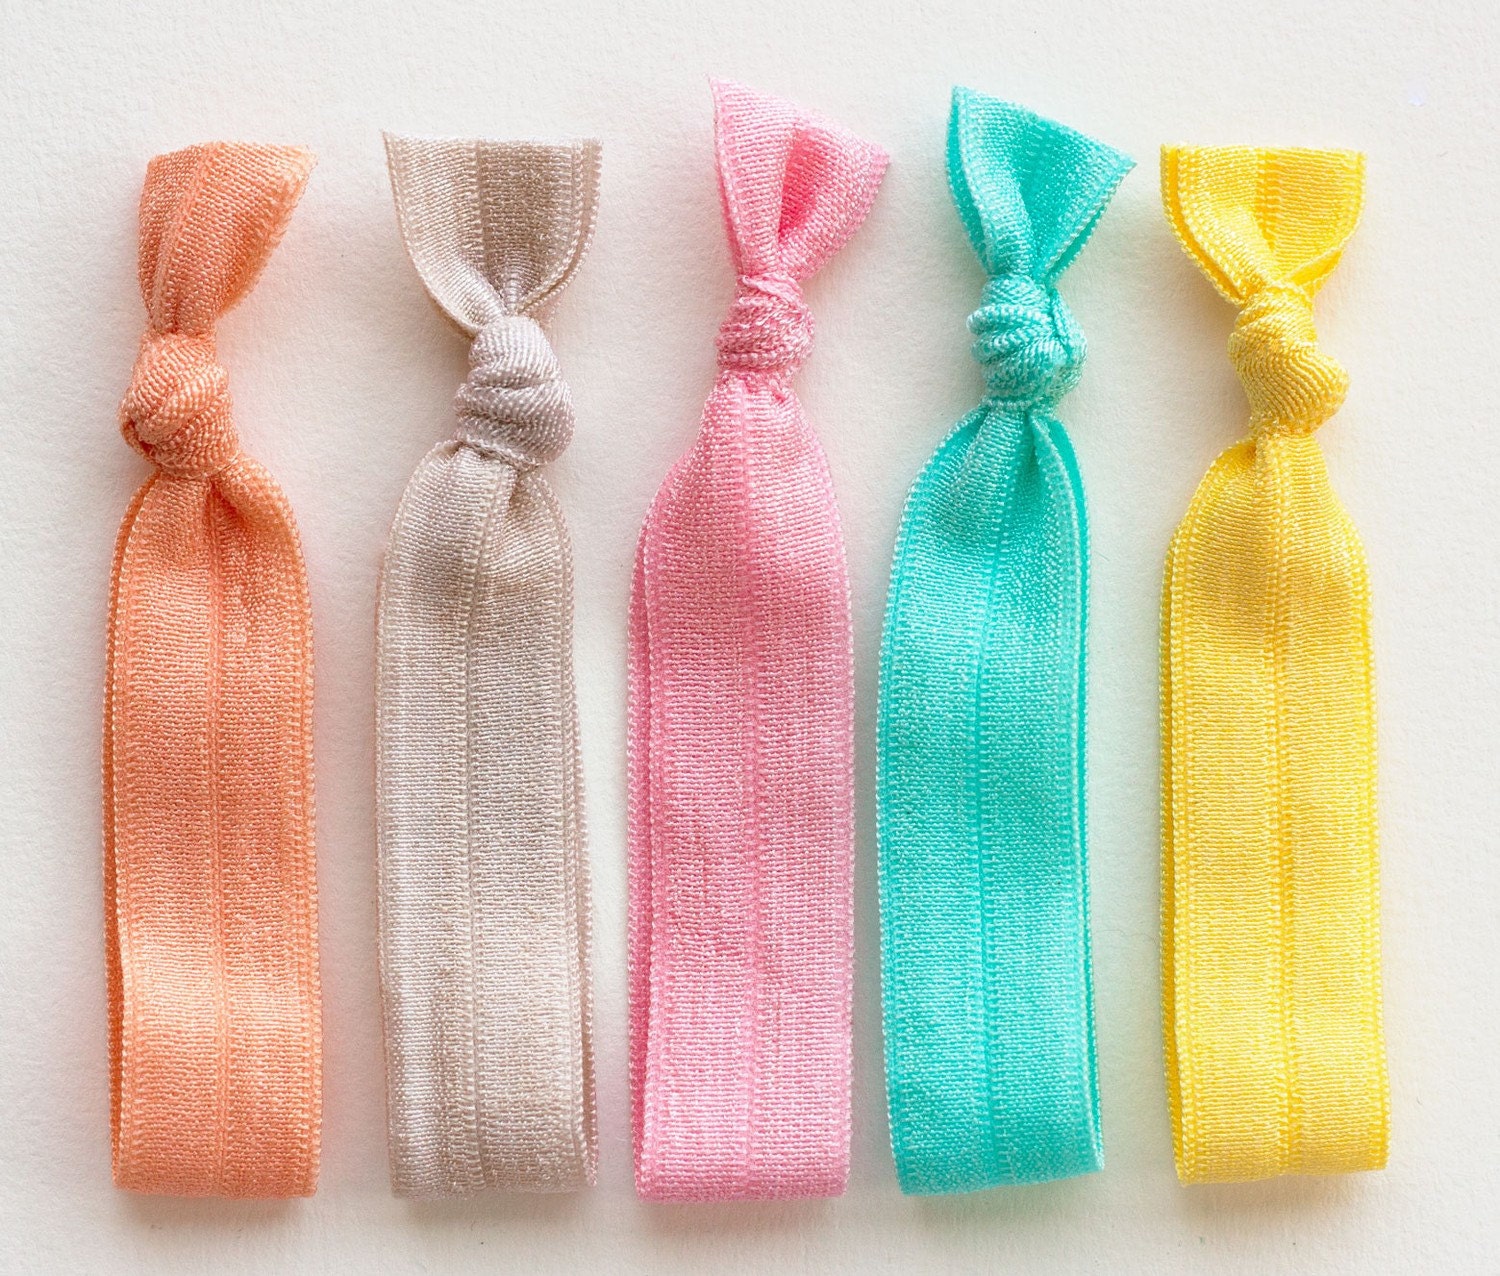 The Soft Package - 5 Elastic Solid Color Hair Ties that Double as Bracelets by Mane Message on Etsy